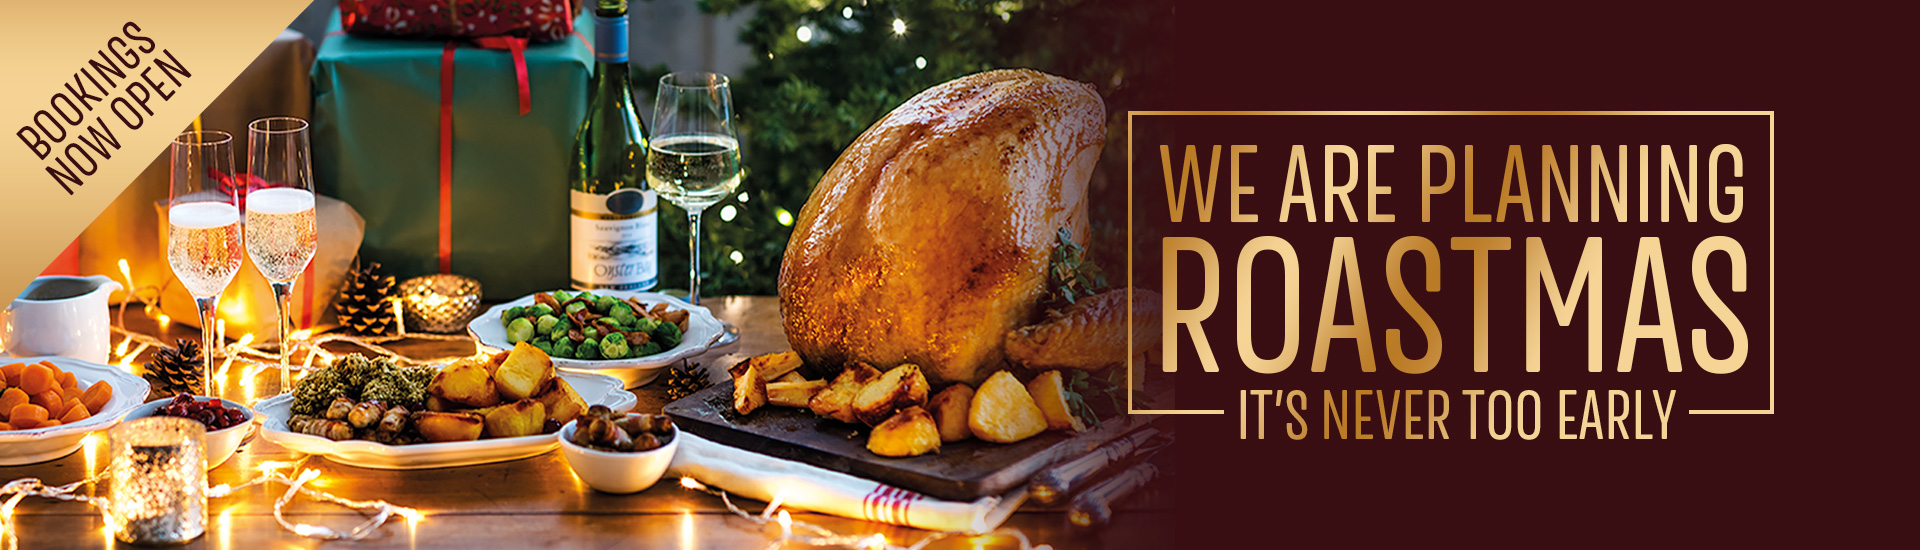 Christmas 2022 at your local Toby Carvery Warrington | Home of the Roast